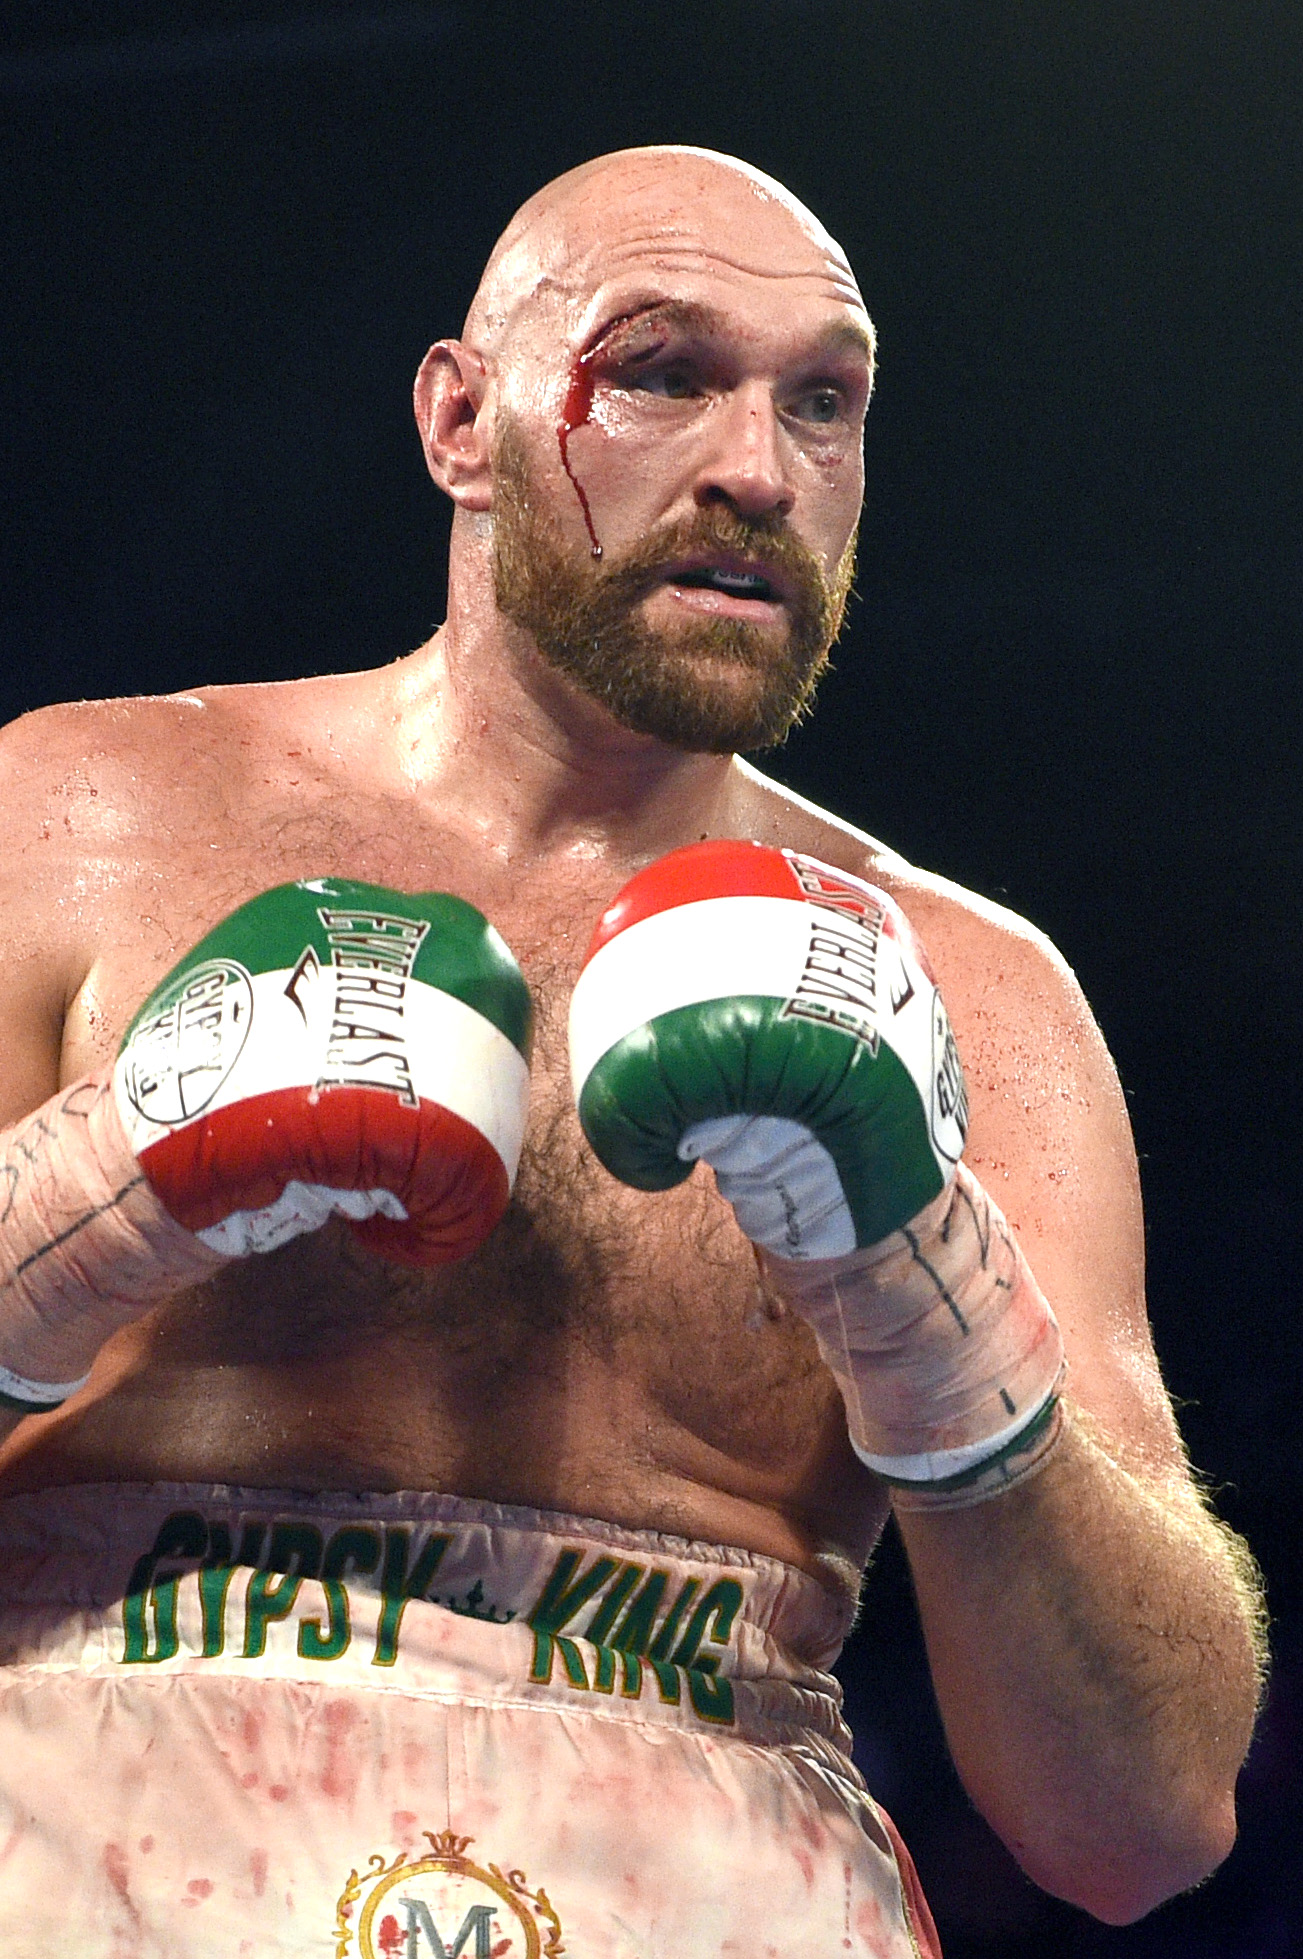 Fury sustained two cuts in the same area against Wallin in 2019